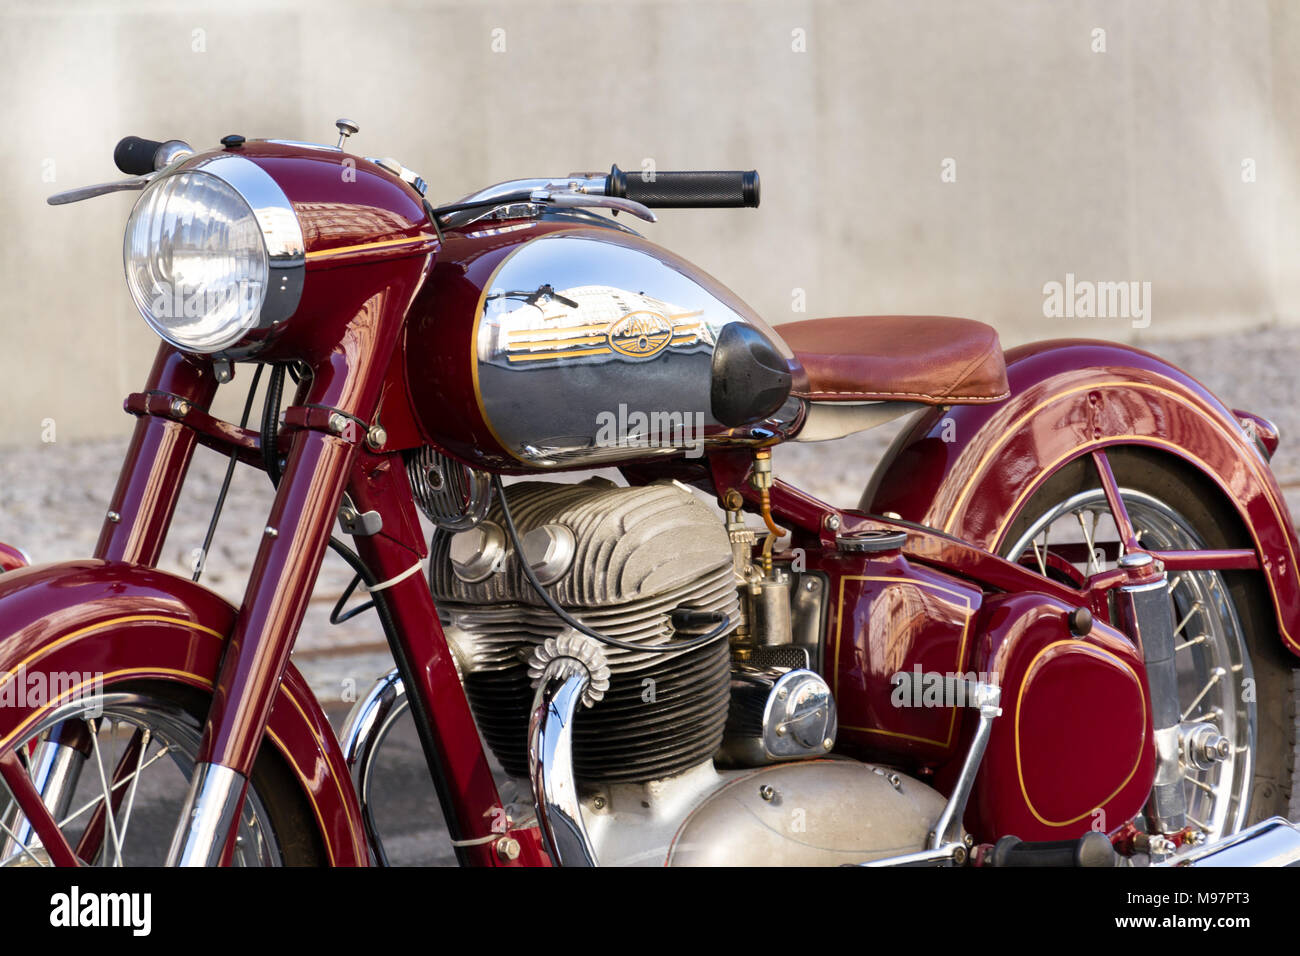 Page 2 - Jawa Motorcycle High Resolution Stock Photography and Images -  Alamy